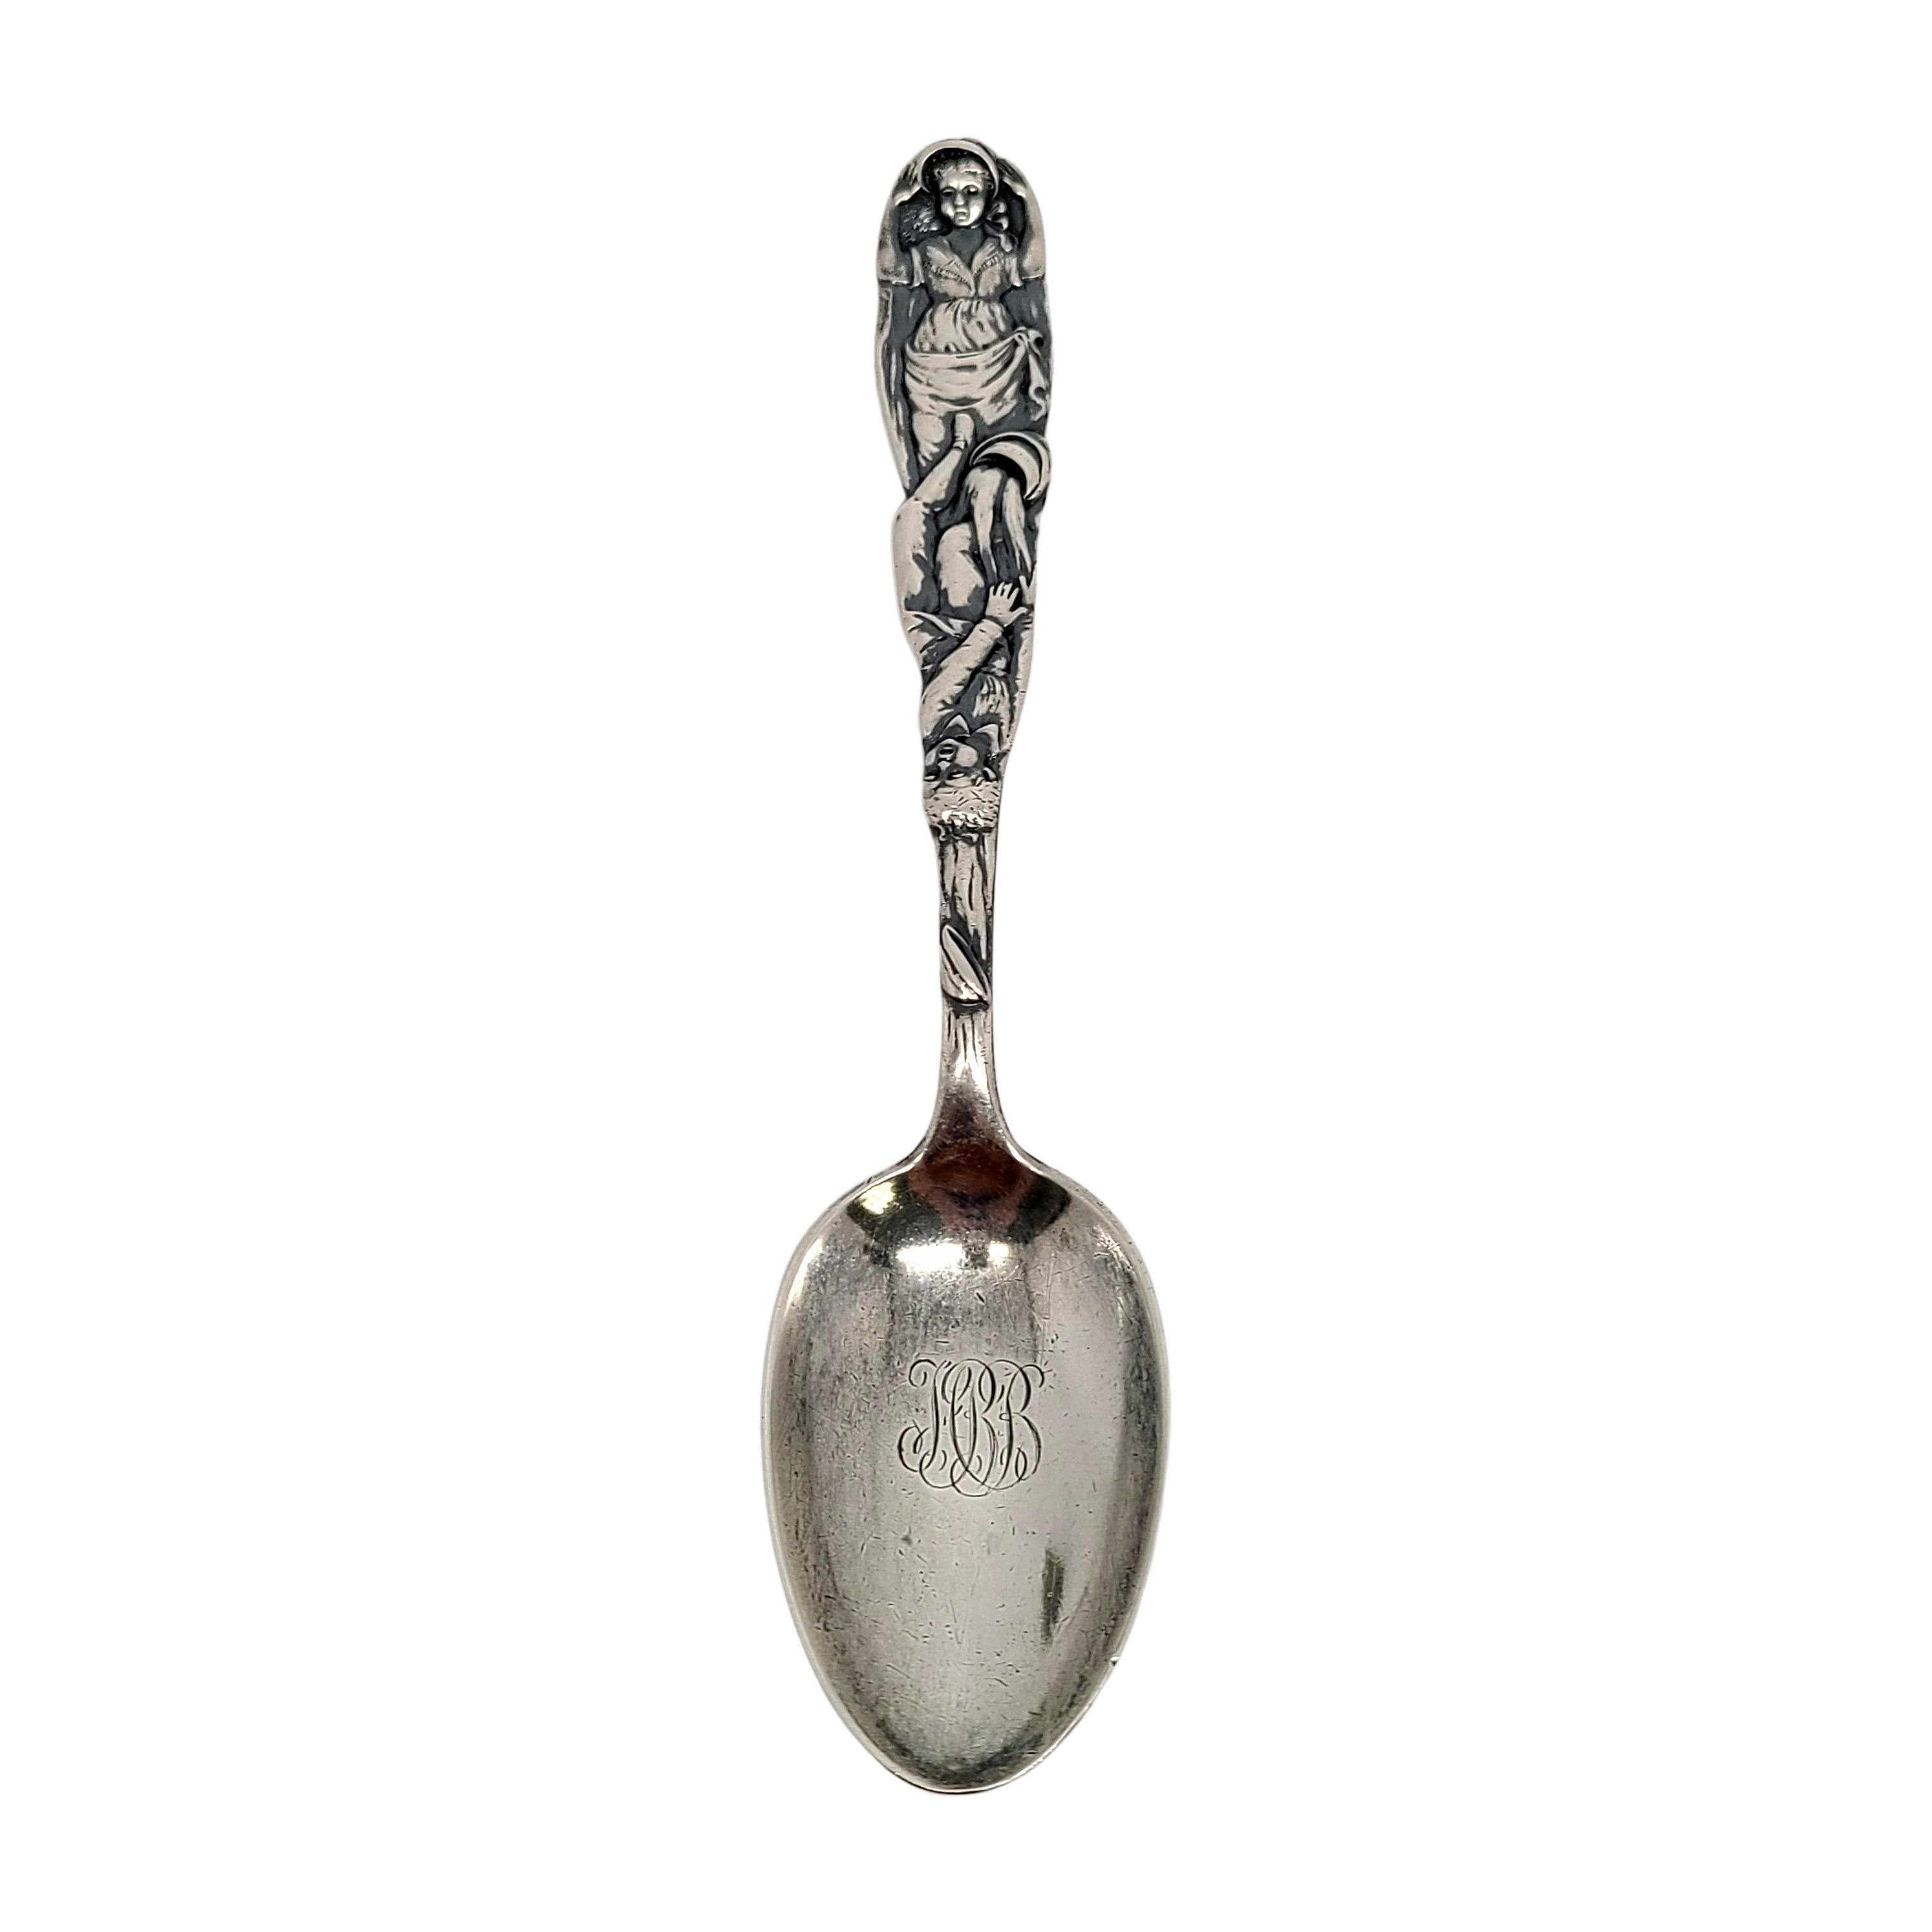 Tiffany & Co sterling silver Jack and Jill youth spoon with monogram.

Monogram on bowl appears to be JBB

A classic design on the front and back of the handle depicting the story of Jack & Jill, featuring Jill holding her bonnet and Jack falling